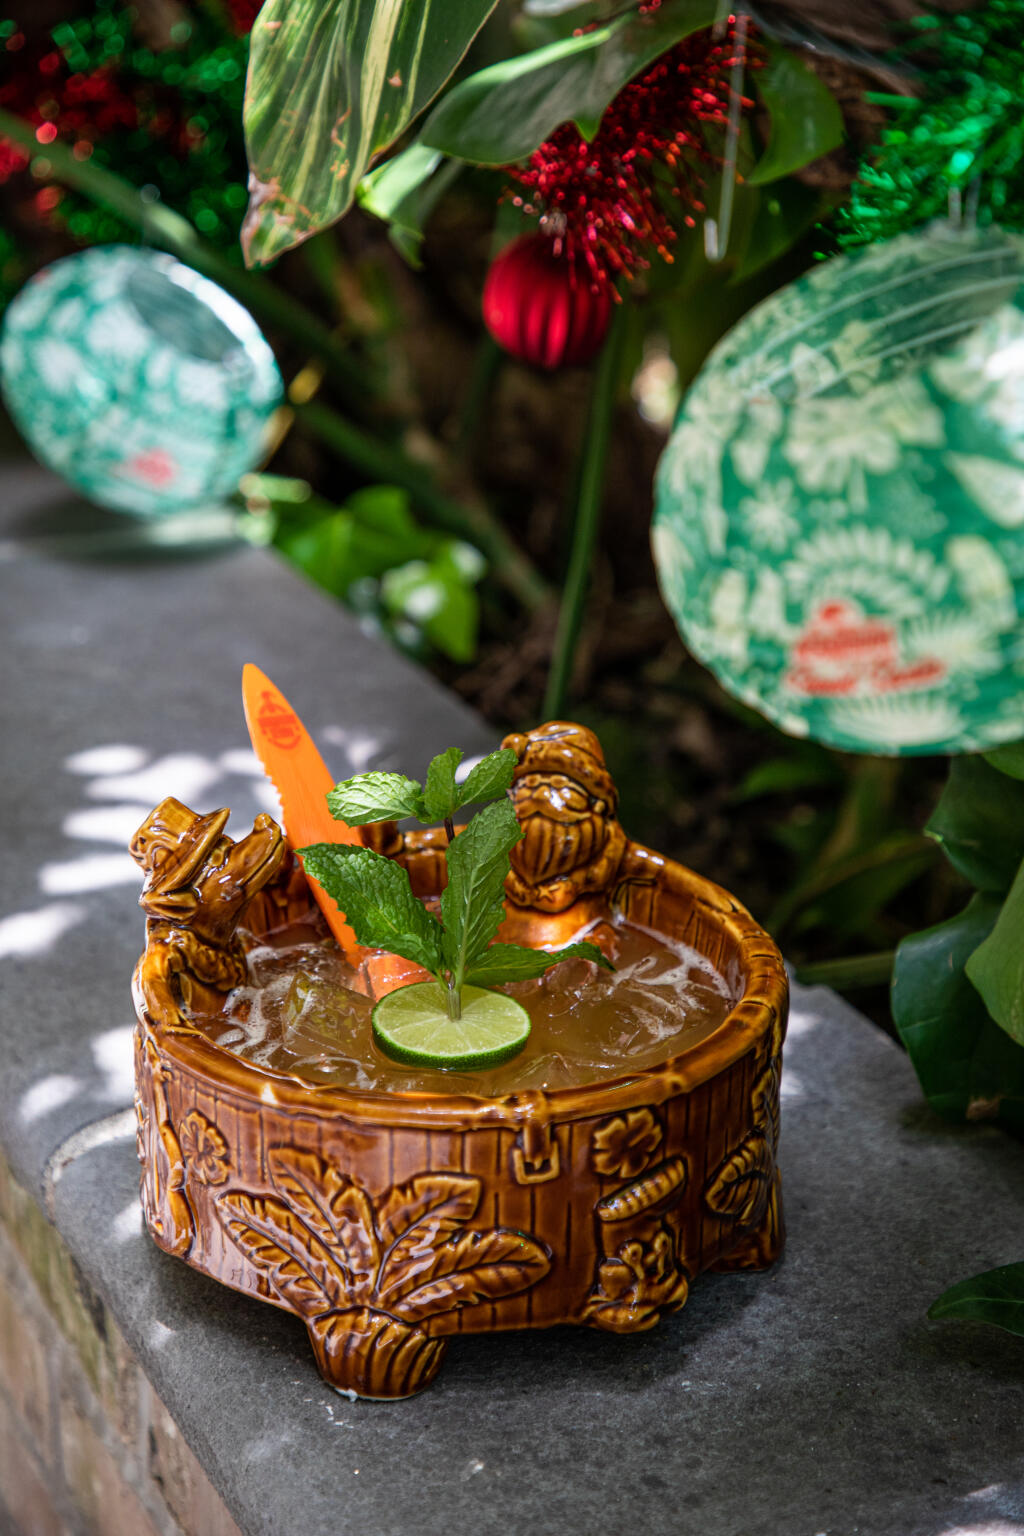 Rudolph’s Rum Rhapsody is one of the tropical cocktails on offer at Sippin’ Santa cocktail pop up at The Flamingo Resort’s Lazeaway Club. (Sippin’ Santa)